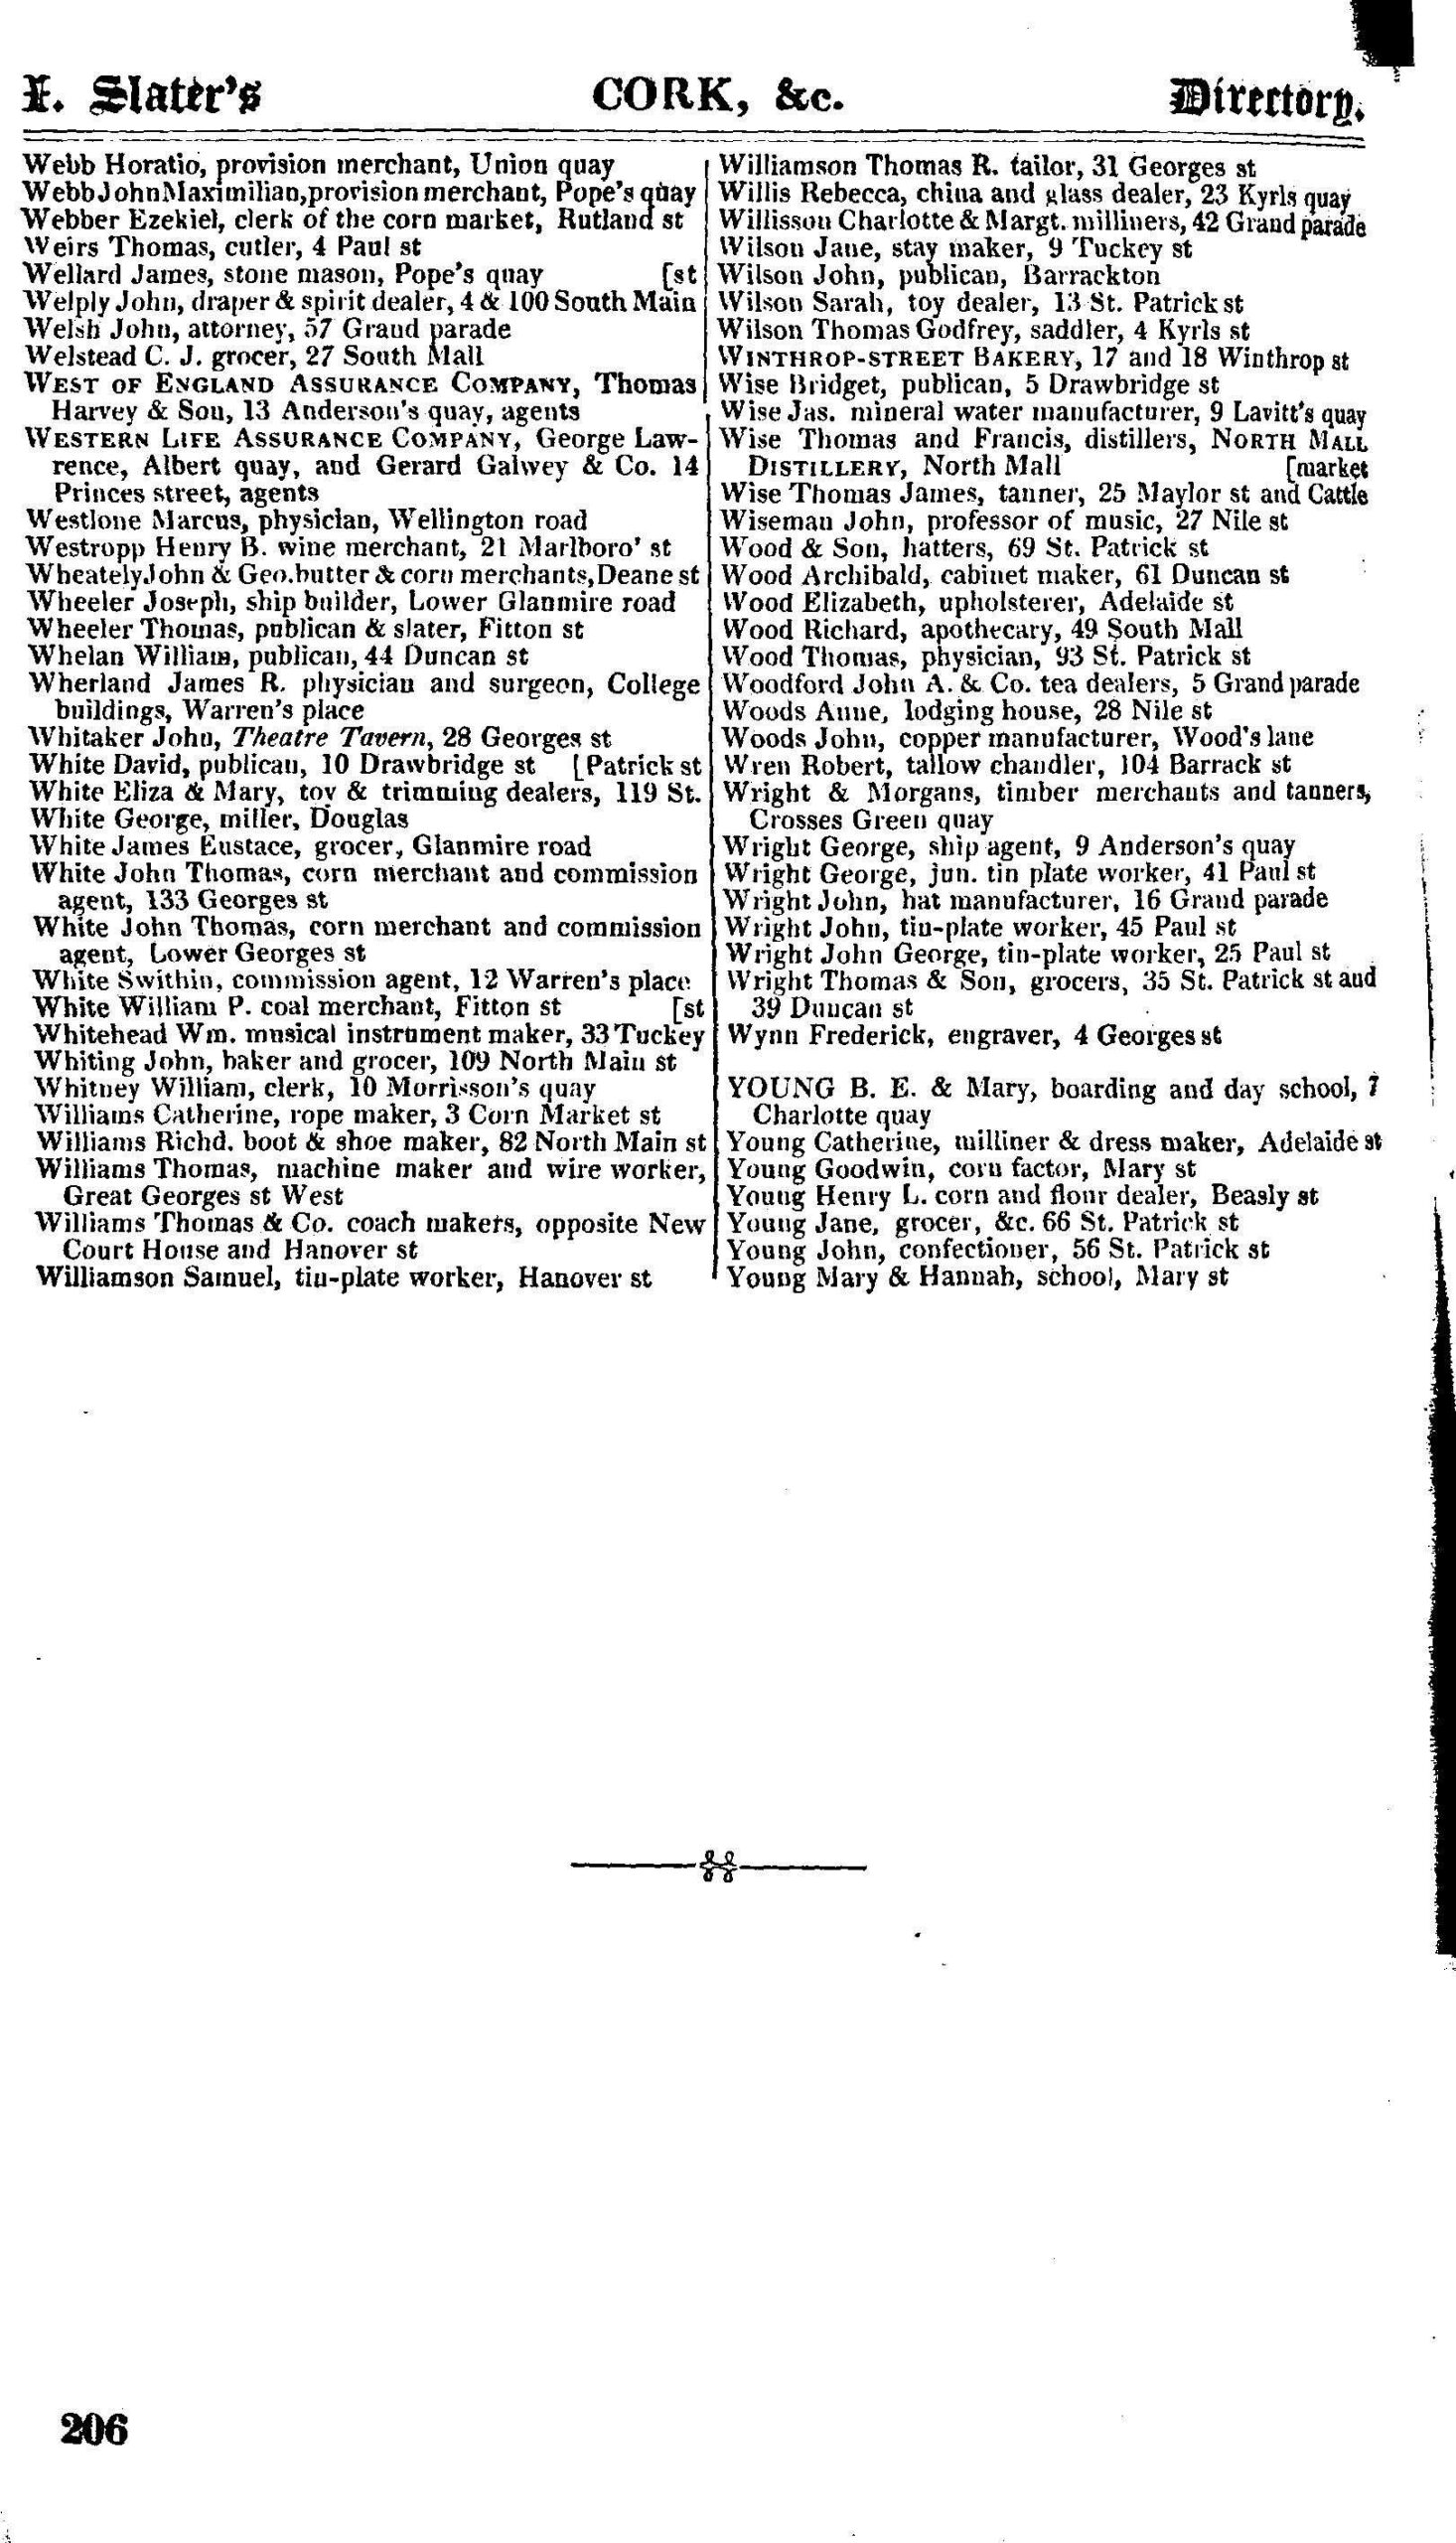 C:\Users\Virginia Rundle\Documents\Ancestry\Wise Files\Wises from Cork\Slaters Directory 1846.jpg